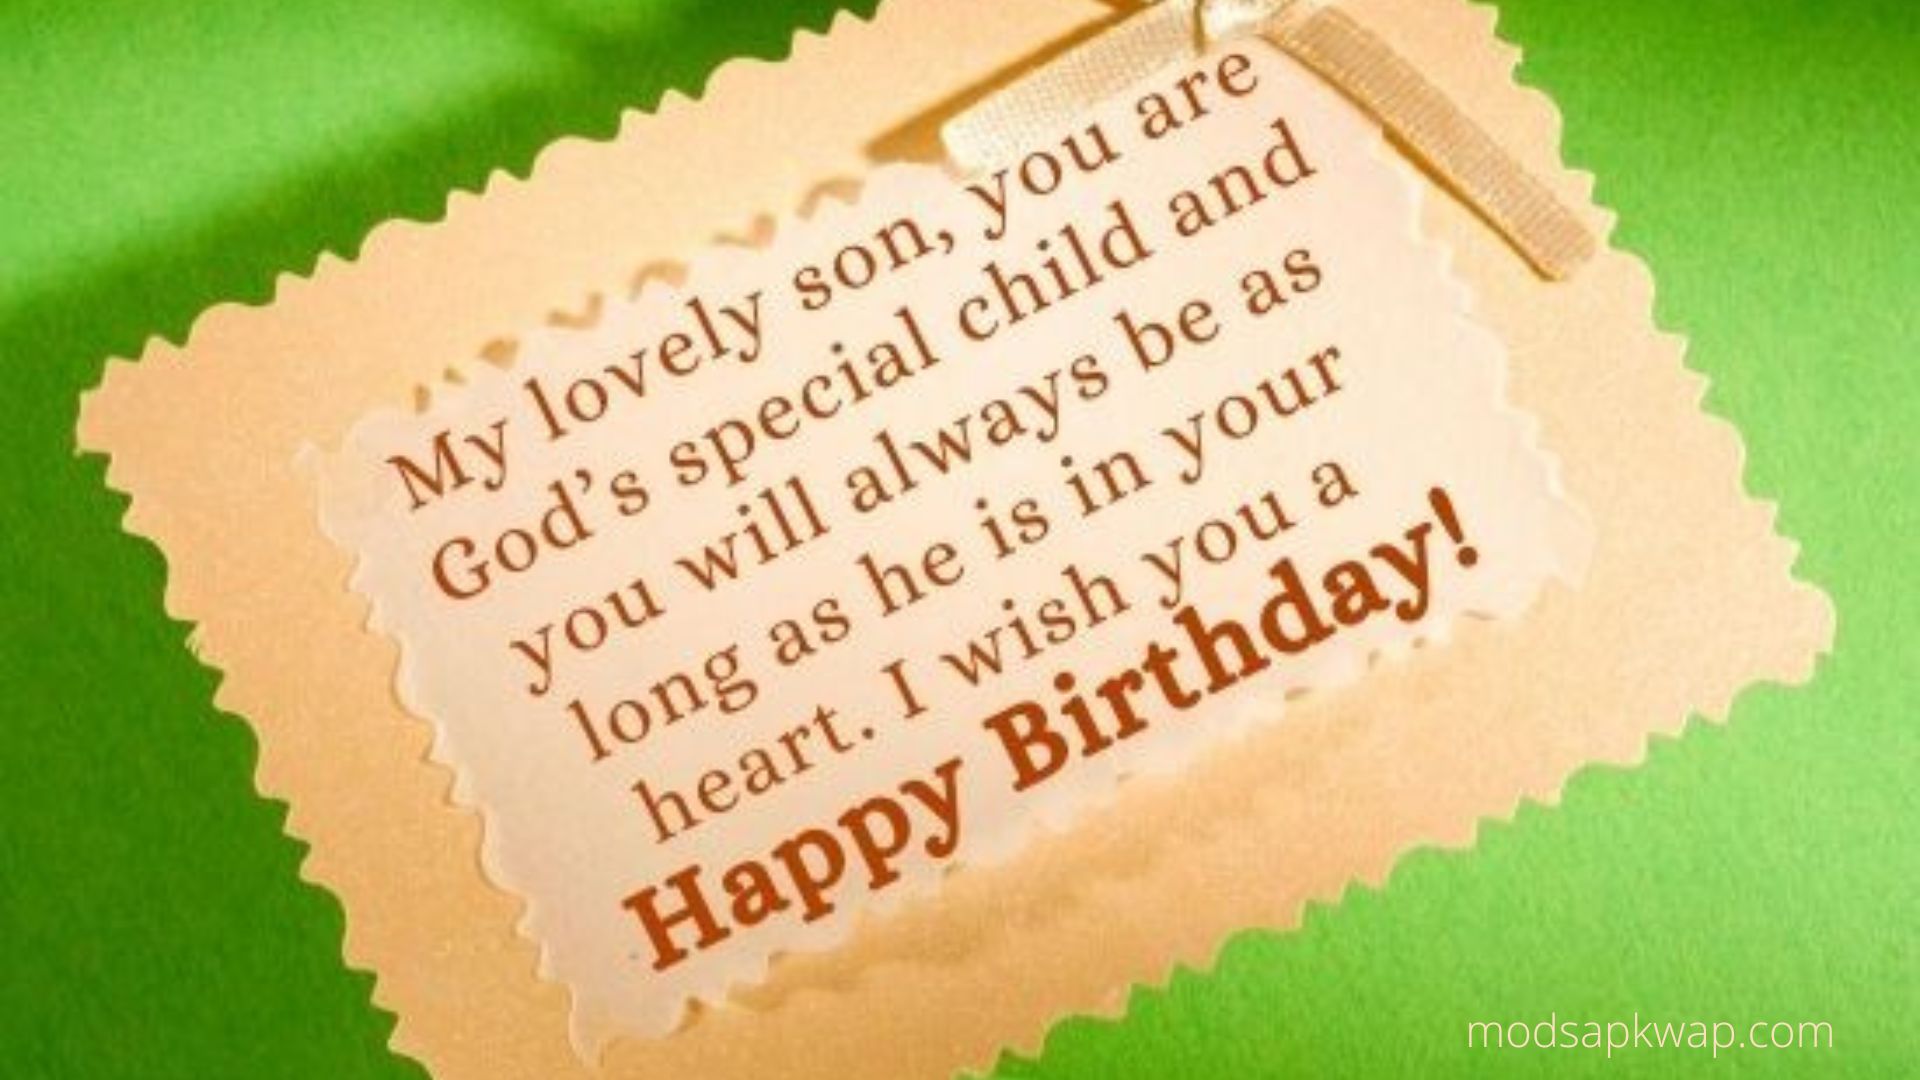 Christian Birthday Wishes For Son